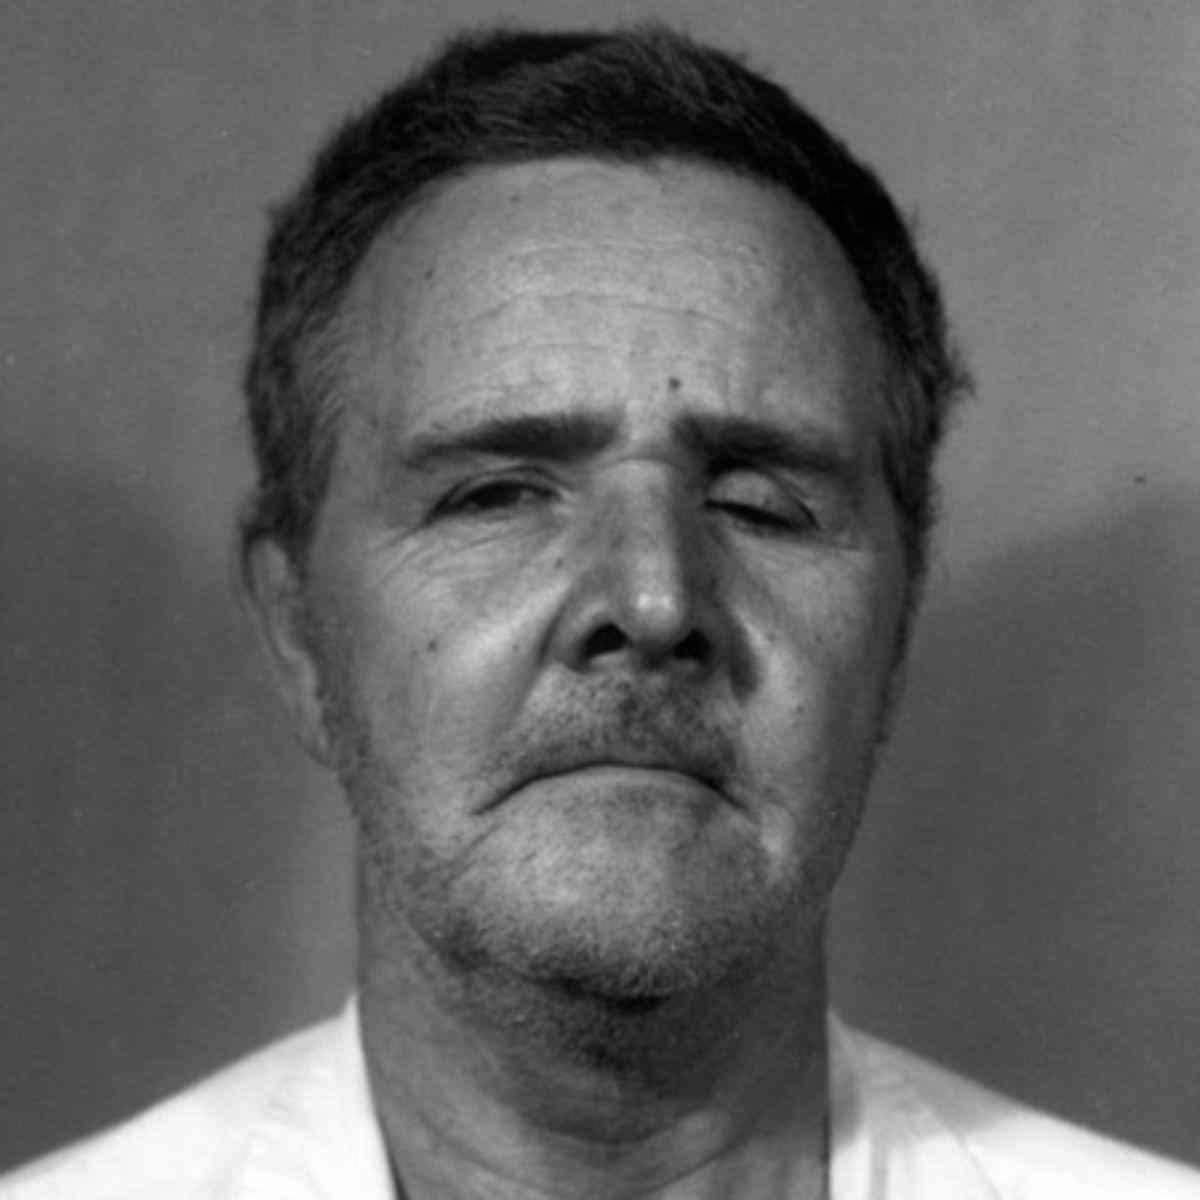 Glass eyed serial killer Mr Lucas who had found a killing acquaintance in Ottis Toole.